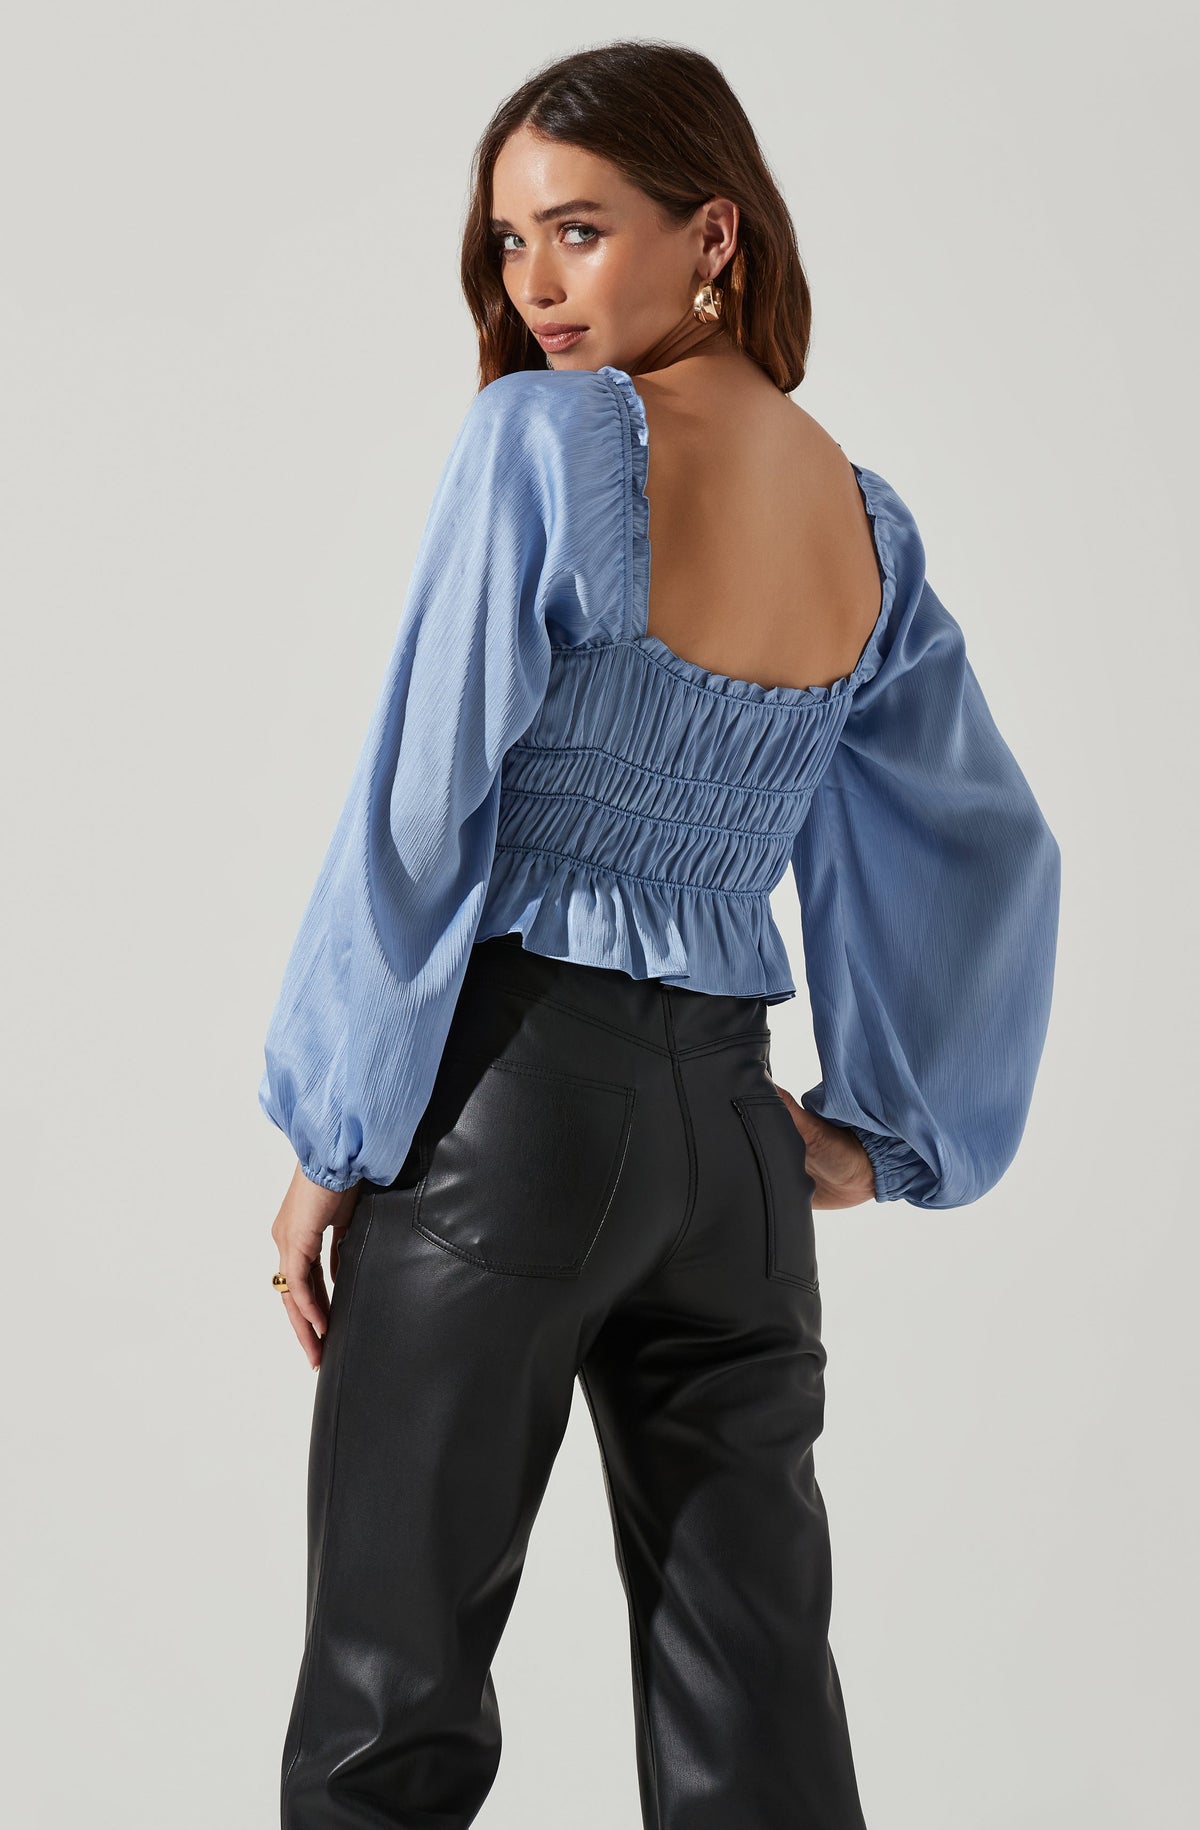 Viona black - sheer lace blouse with long bell sleeves